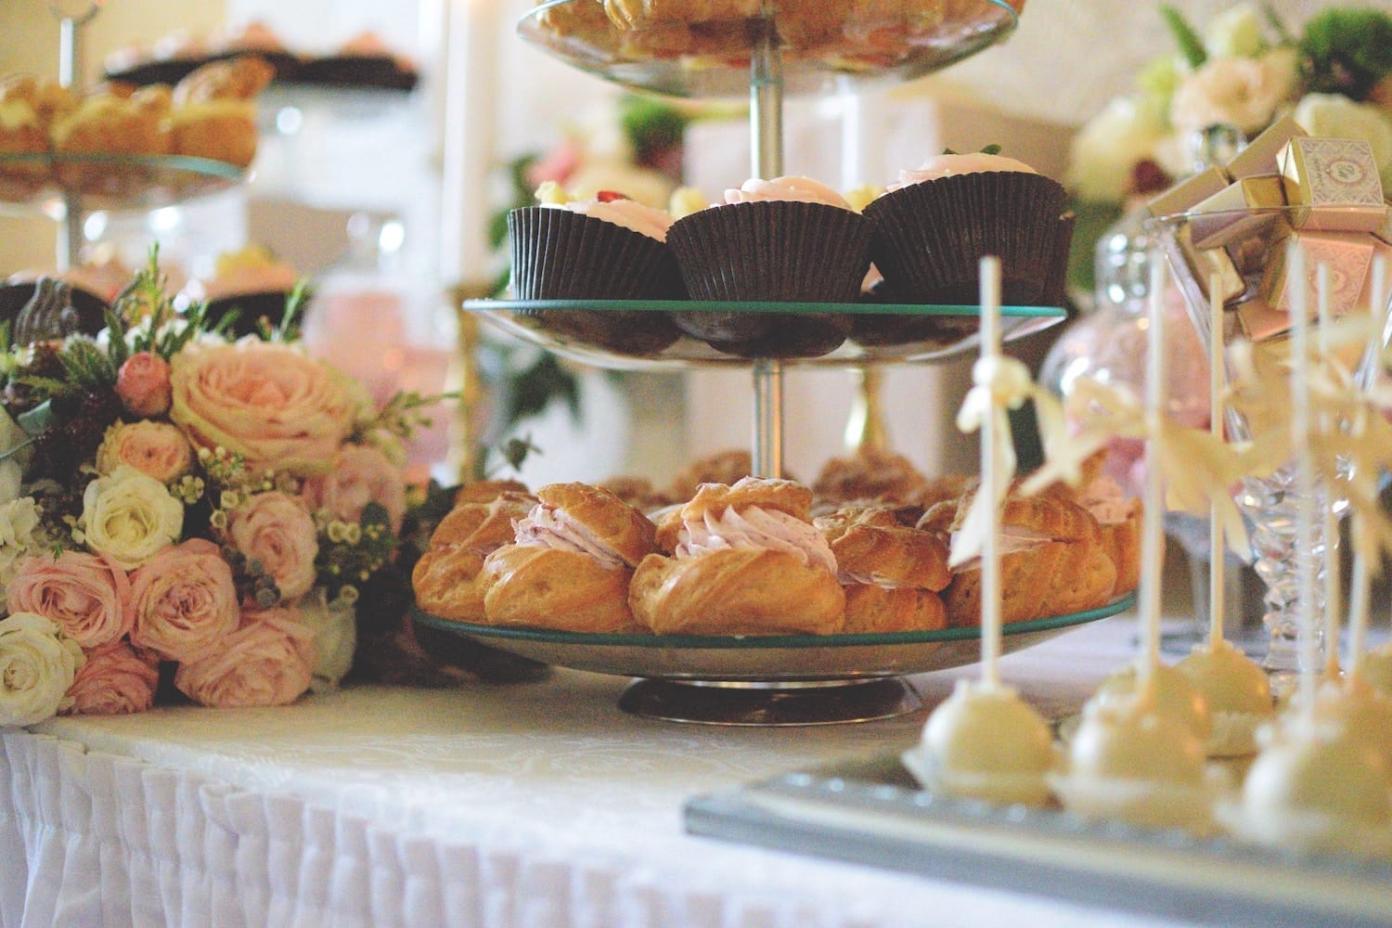 What Are Some Tips for Choosing a Wedding Caterer?